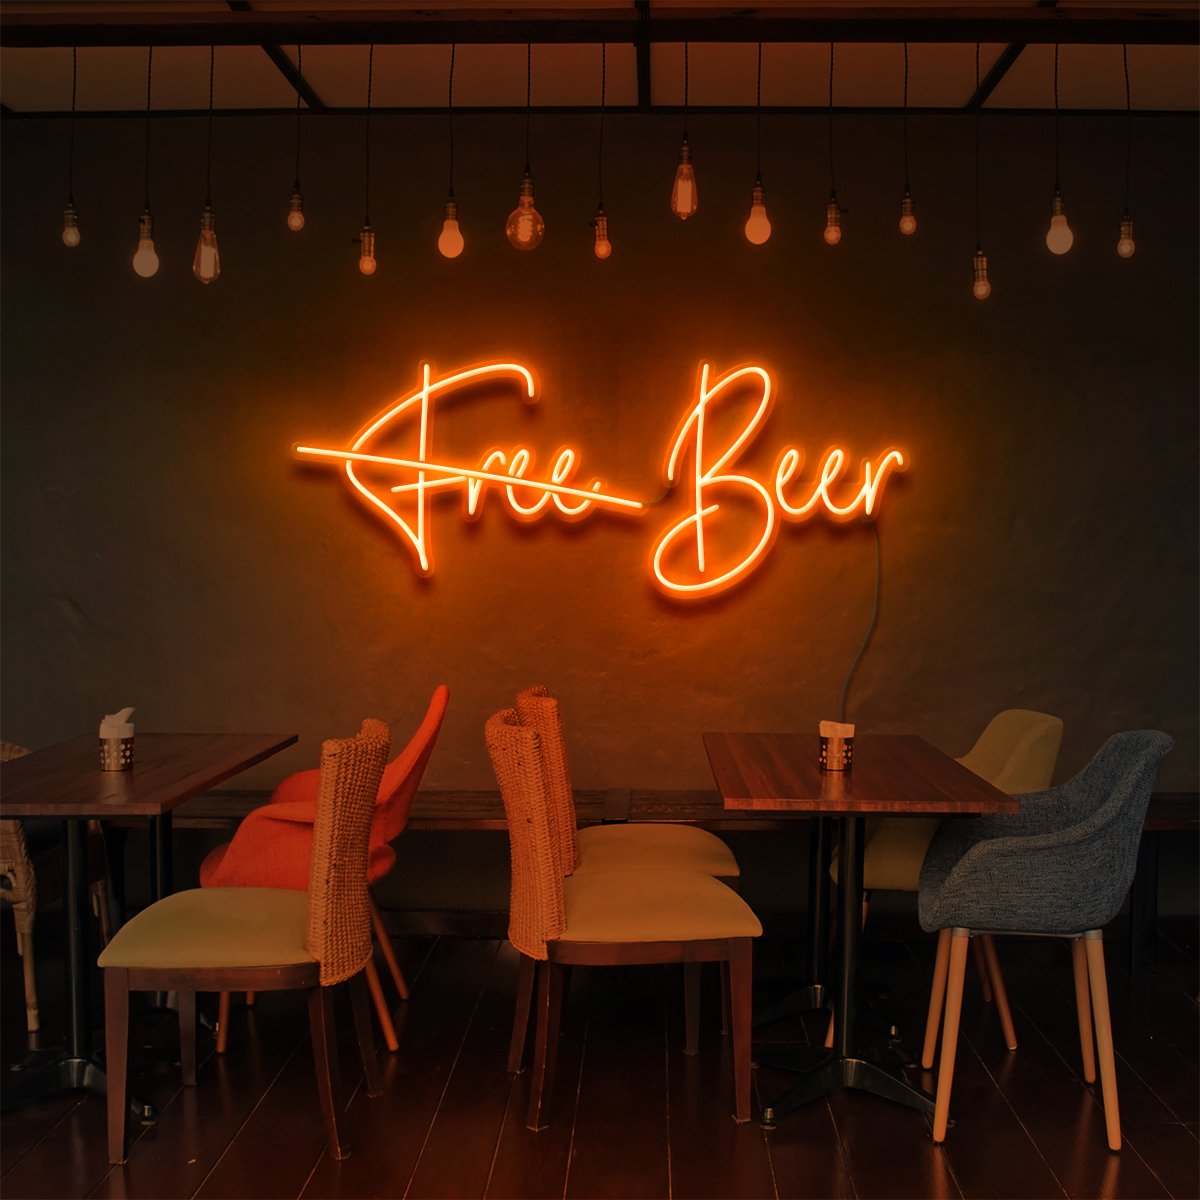 "Free Beer" Neon Sign for Bars & Restaurants 60cm (2ft) / Orange / LED Neon by Neon Icons